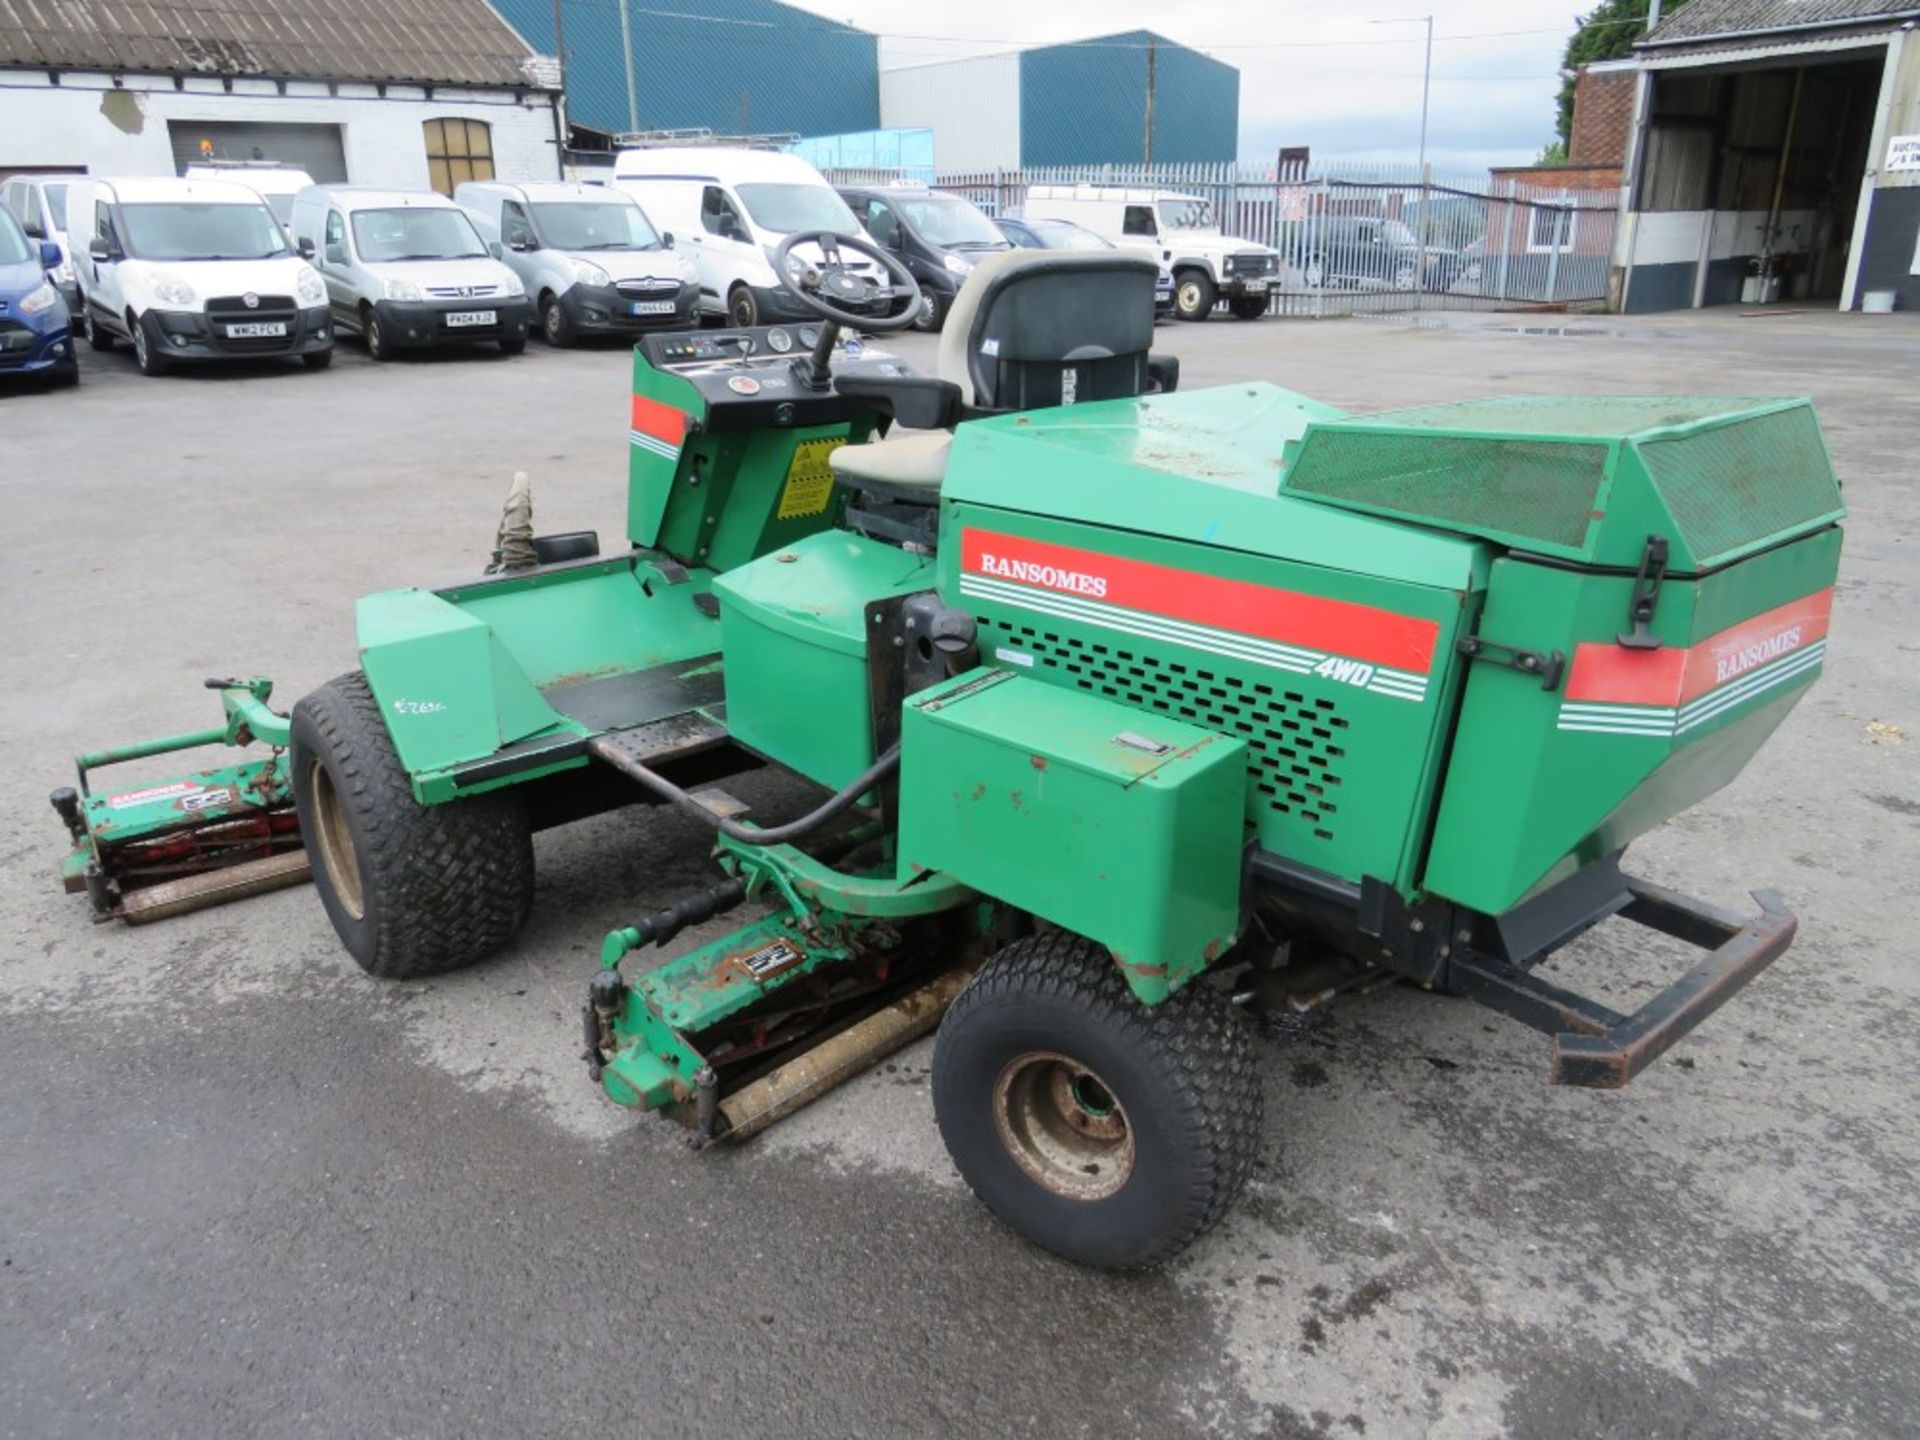 RANSOMES FAIRWAY 300 5 GANG RIDE ON MOWER, 6464 HOURS [+ VAT] - Image 4 of 6